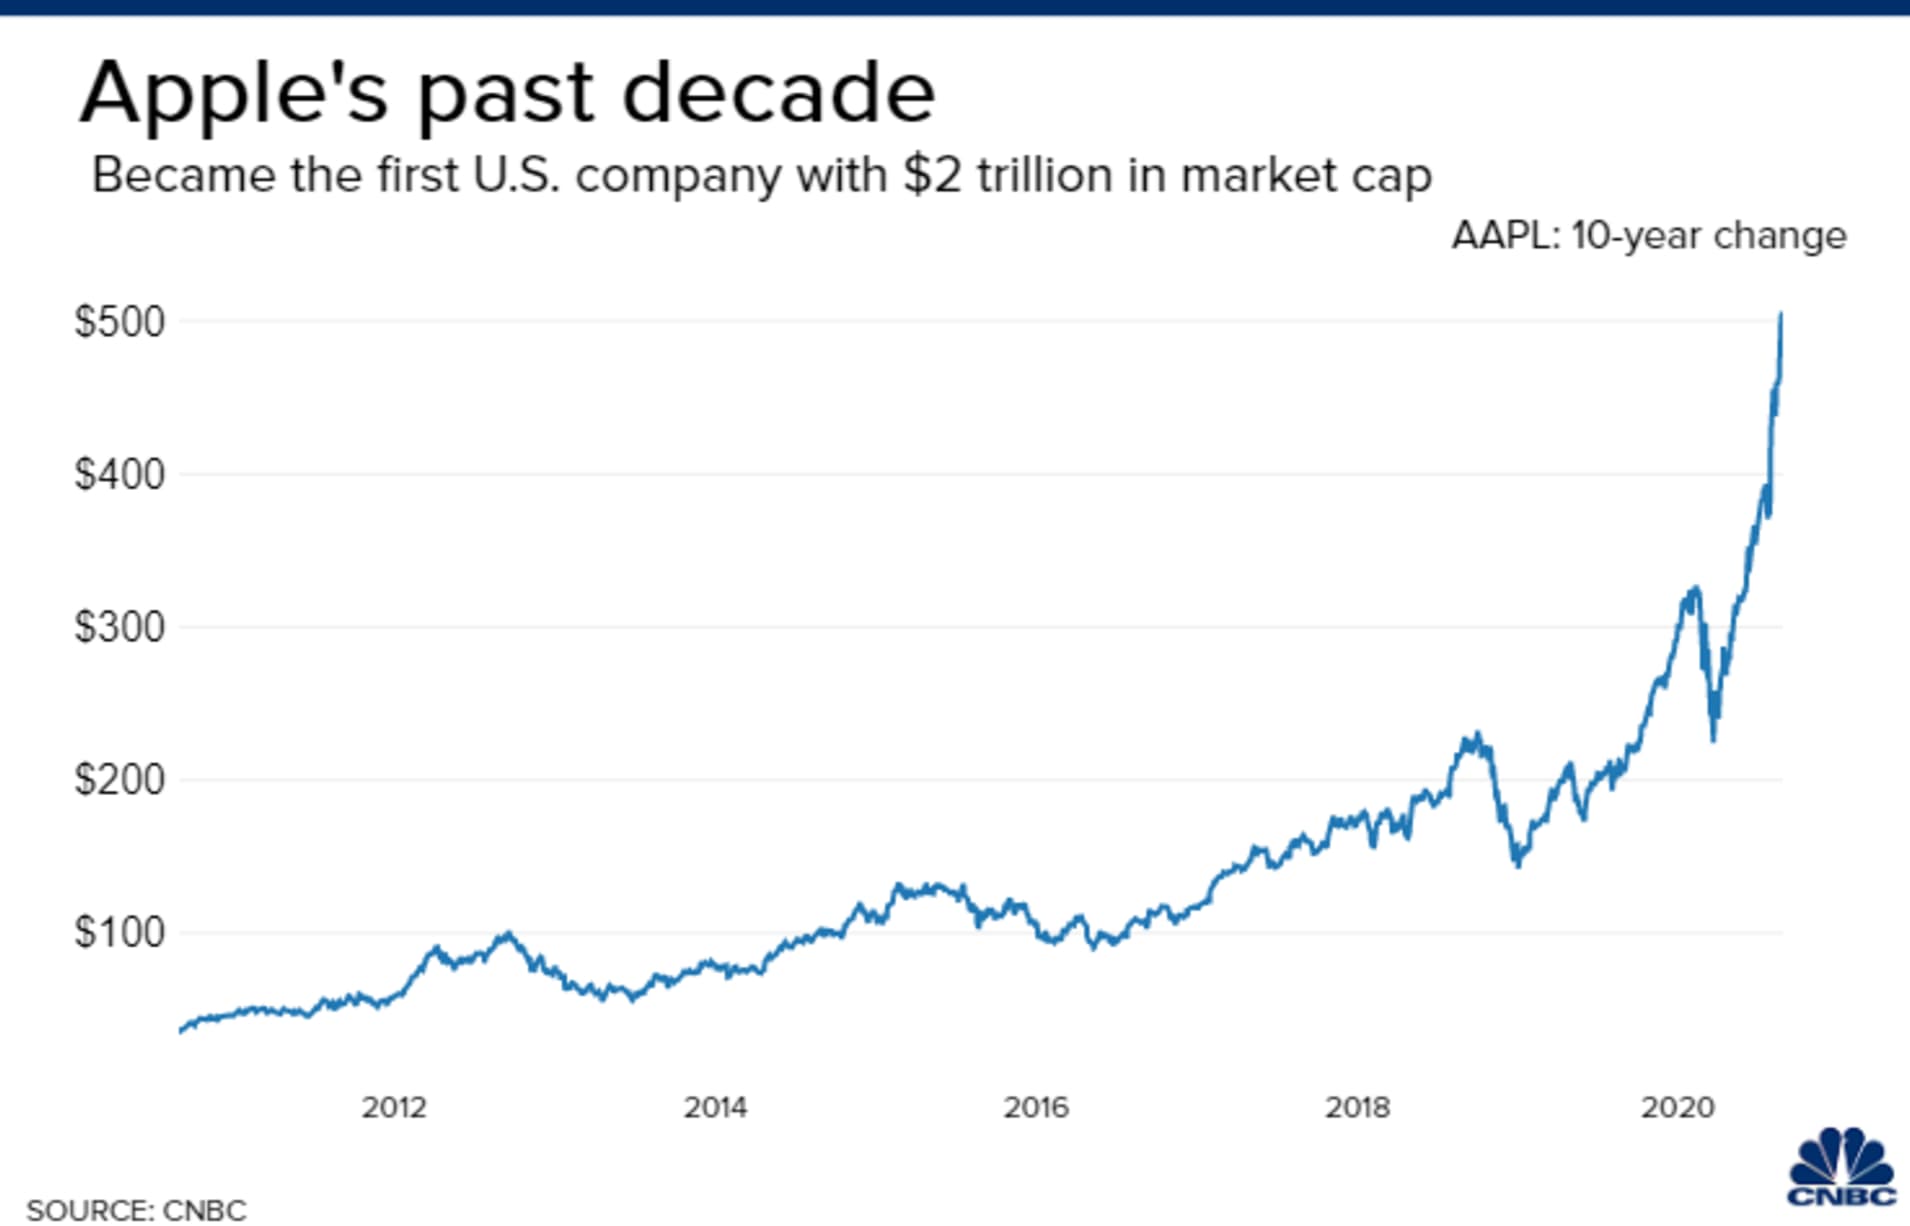 Apple stock over the past 10 years